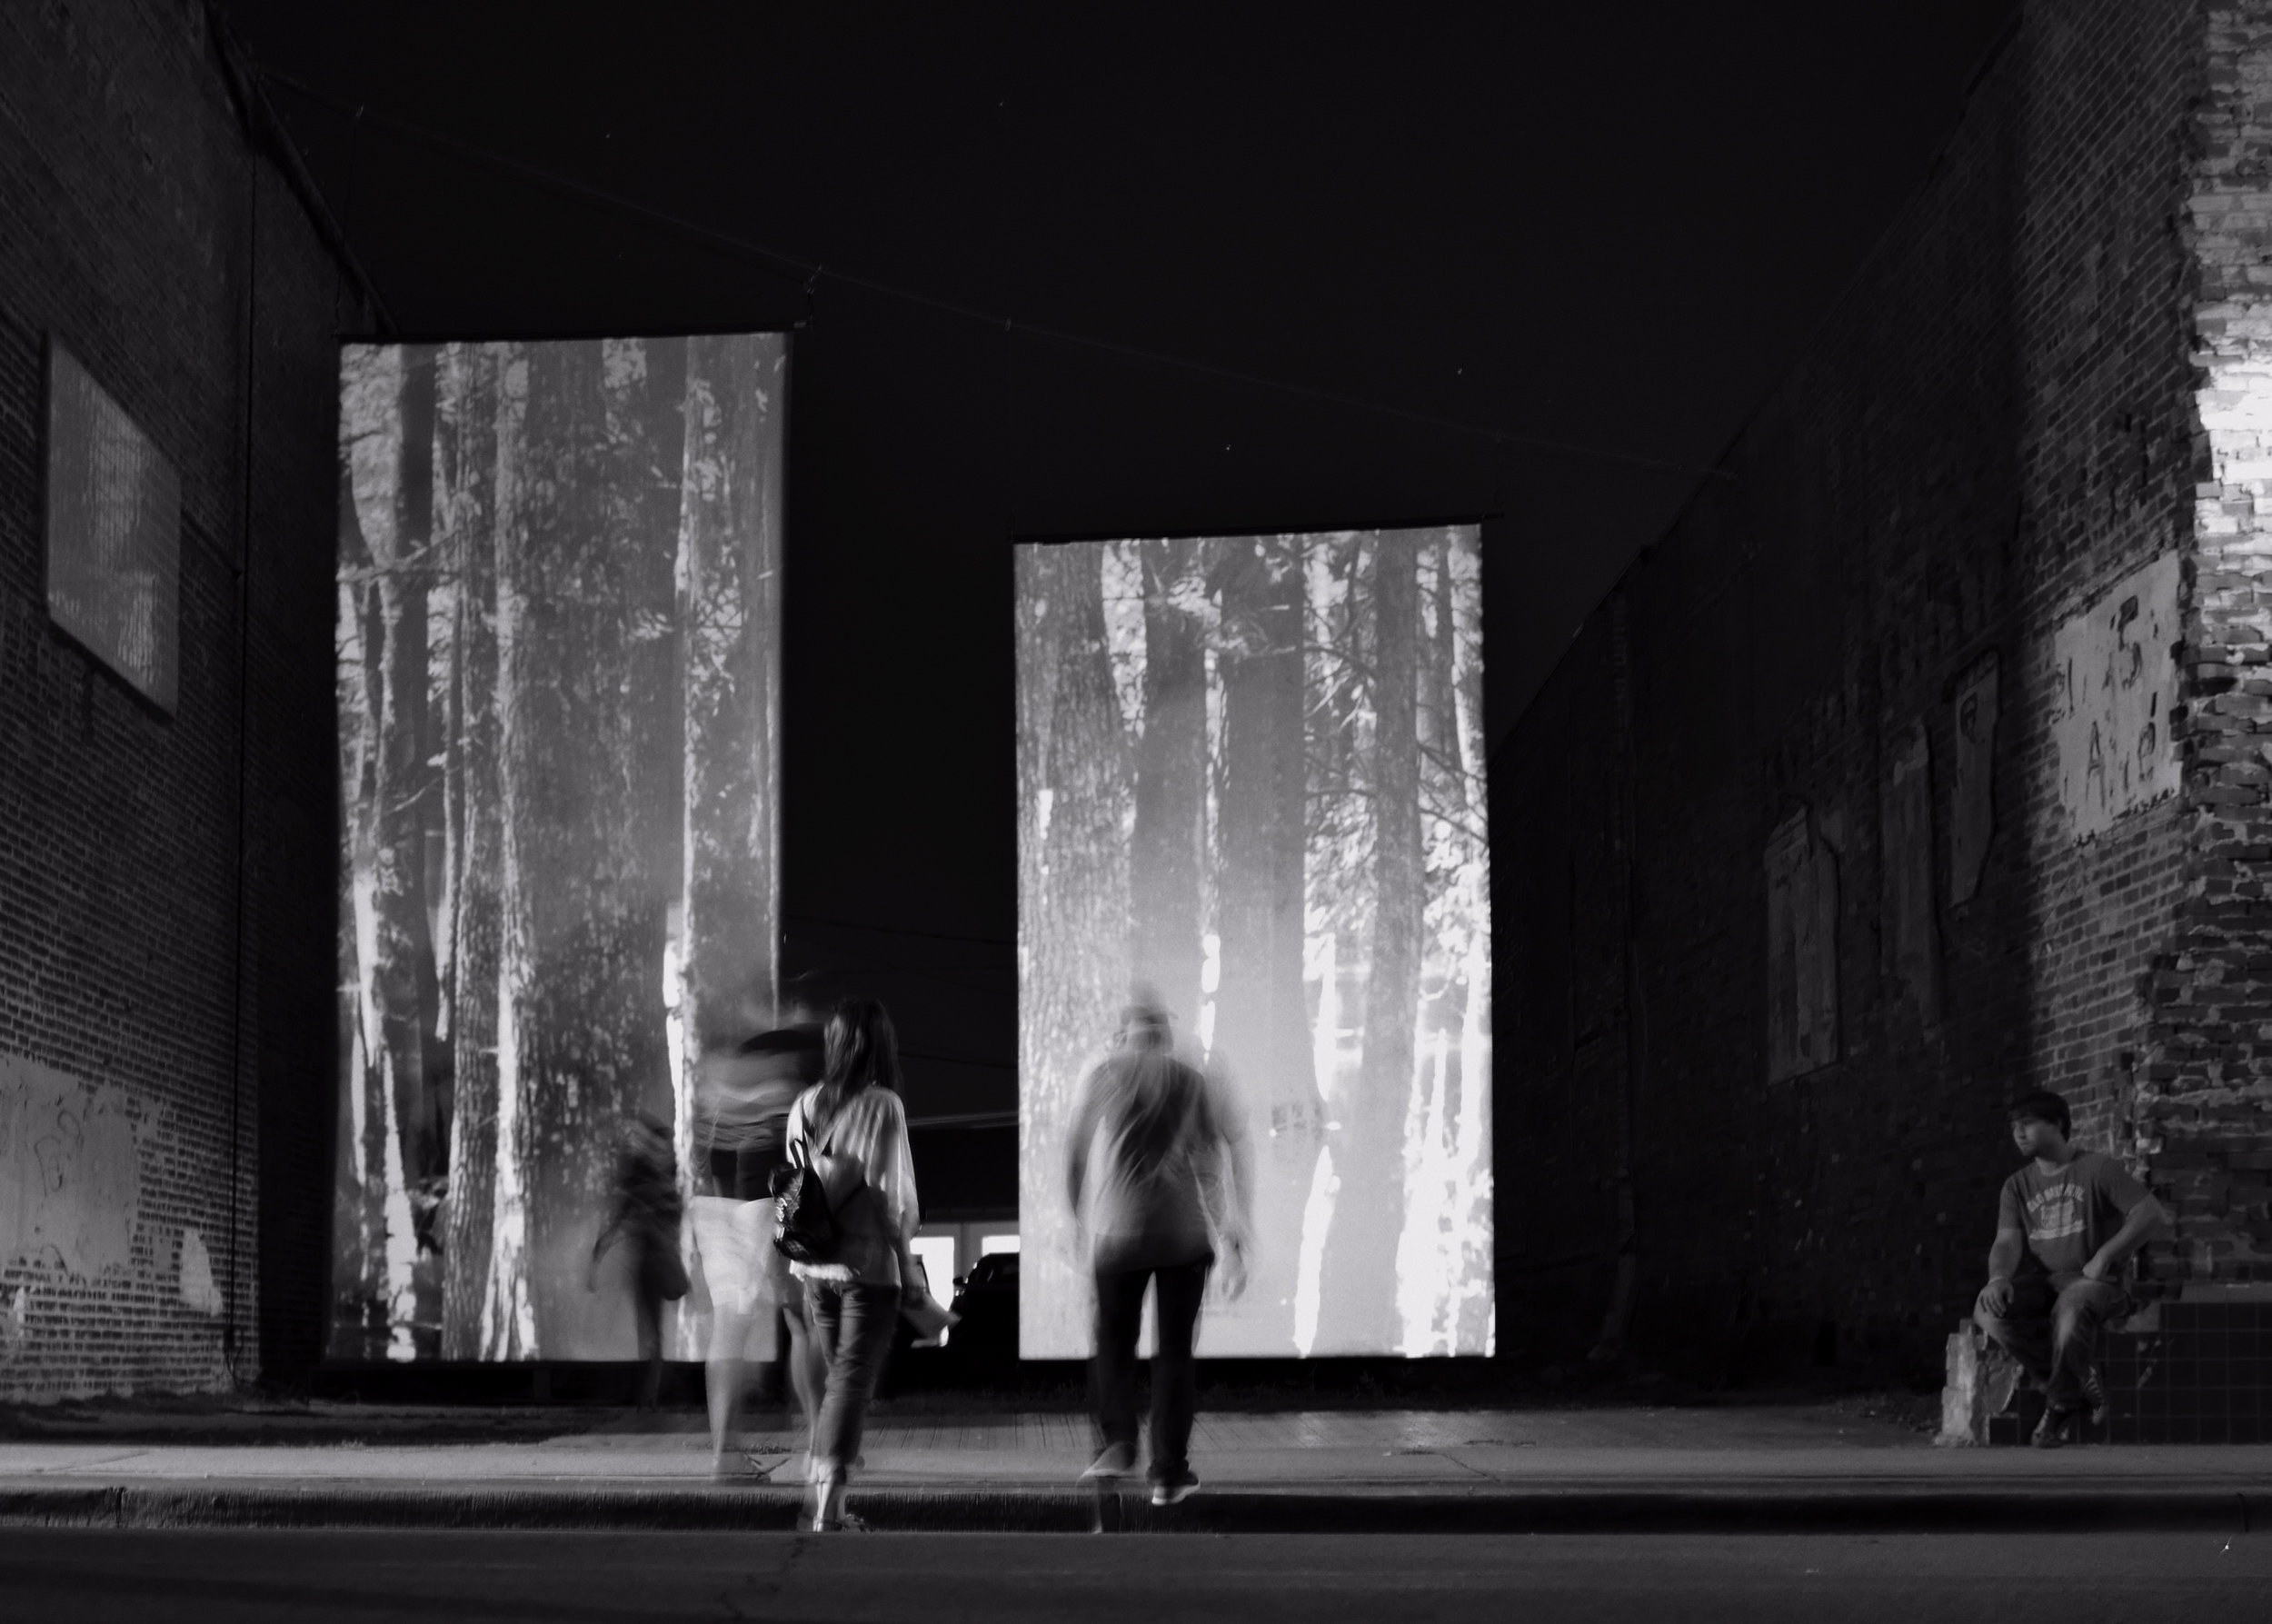 A black and white photo of a video art installation being projected onto a building